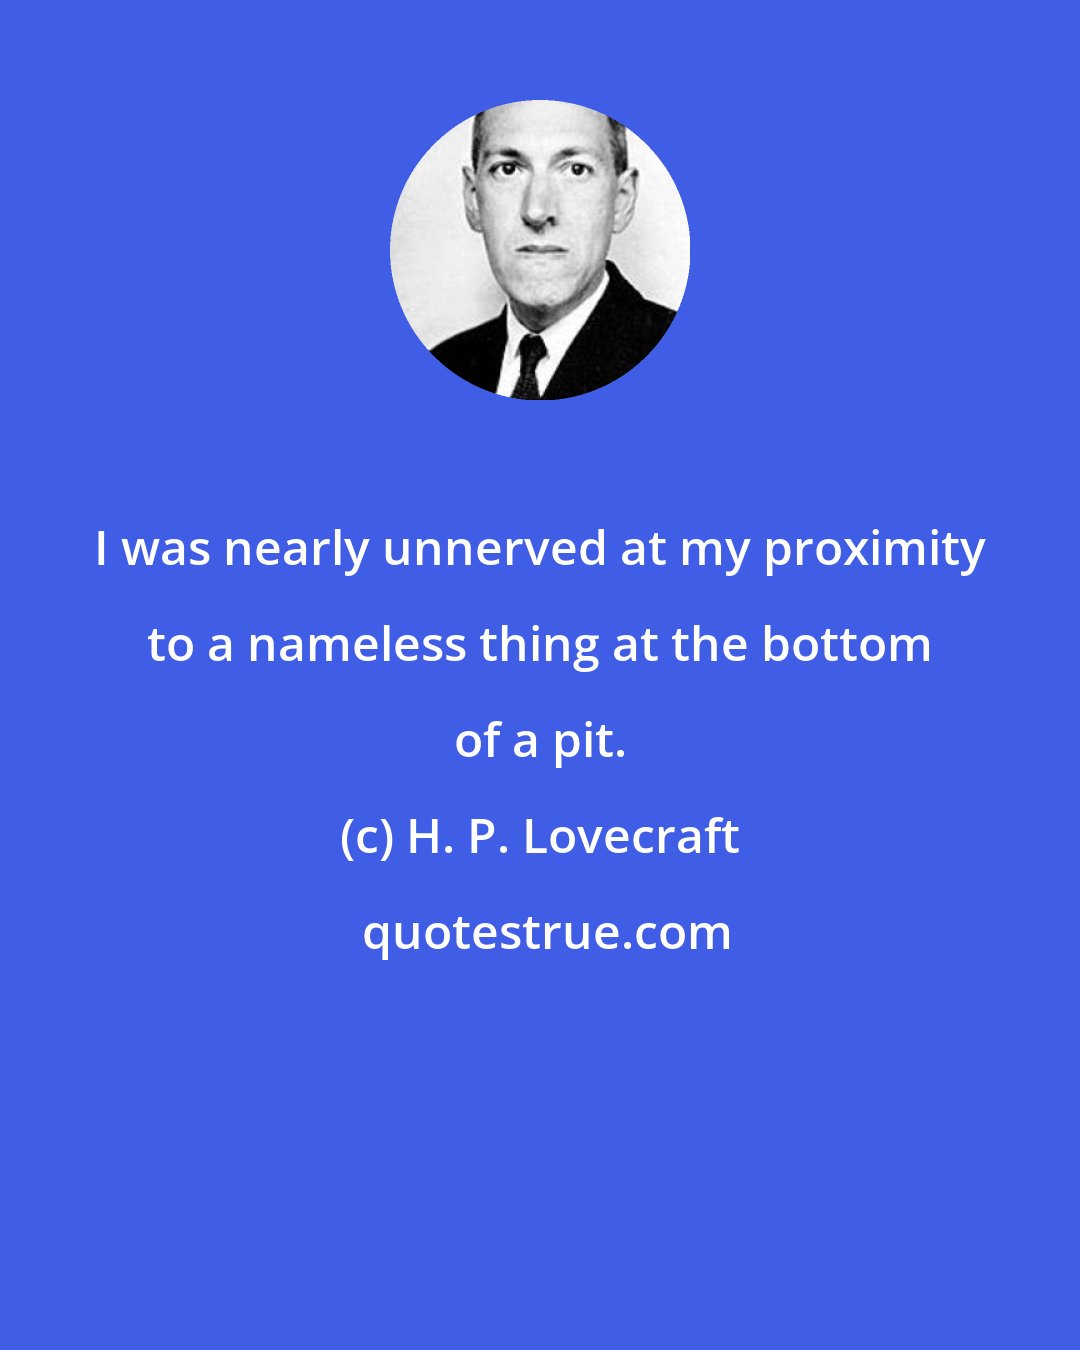 H. P. Lovecraft: I was nearly unnerved at my proximity to a nameless thing at the bottom of a pit.